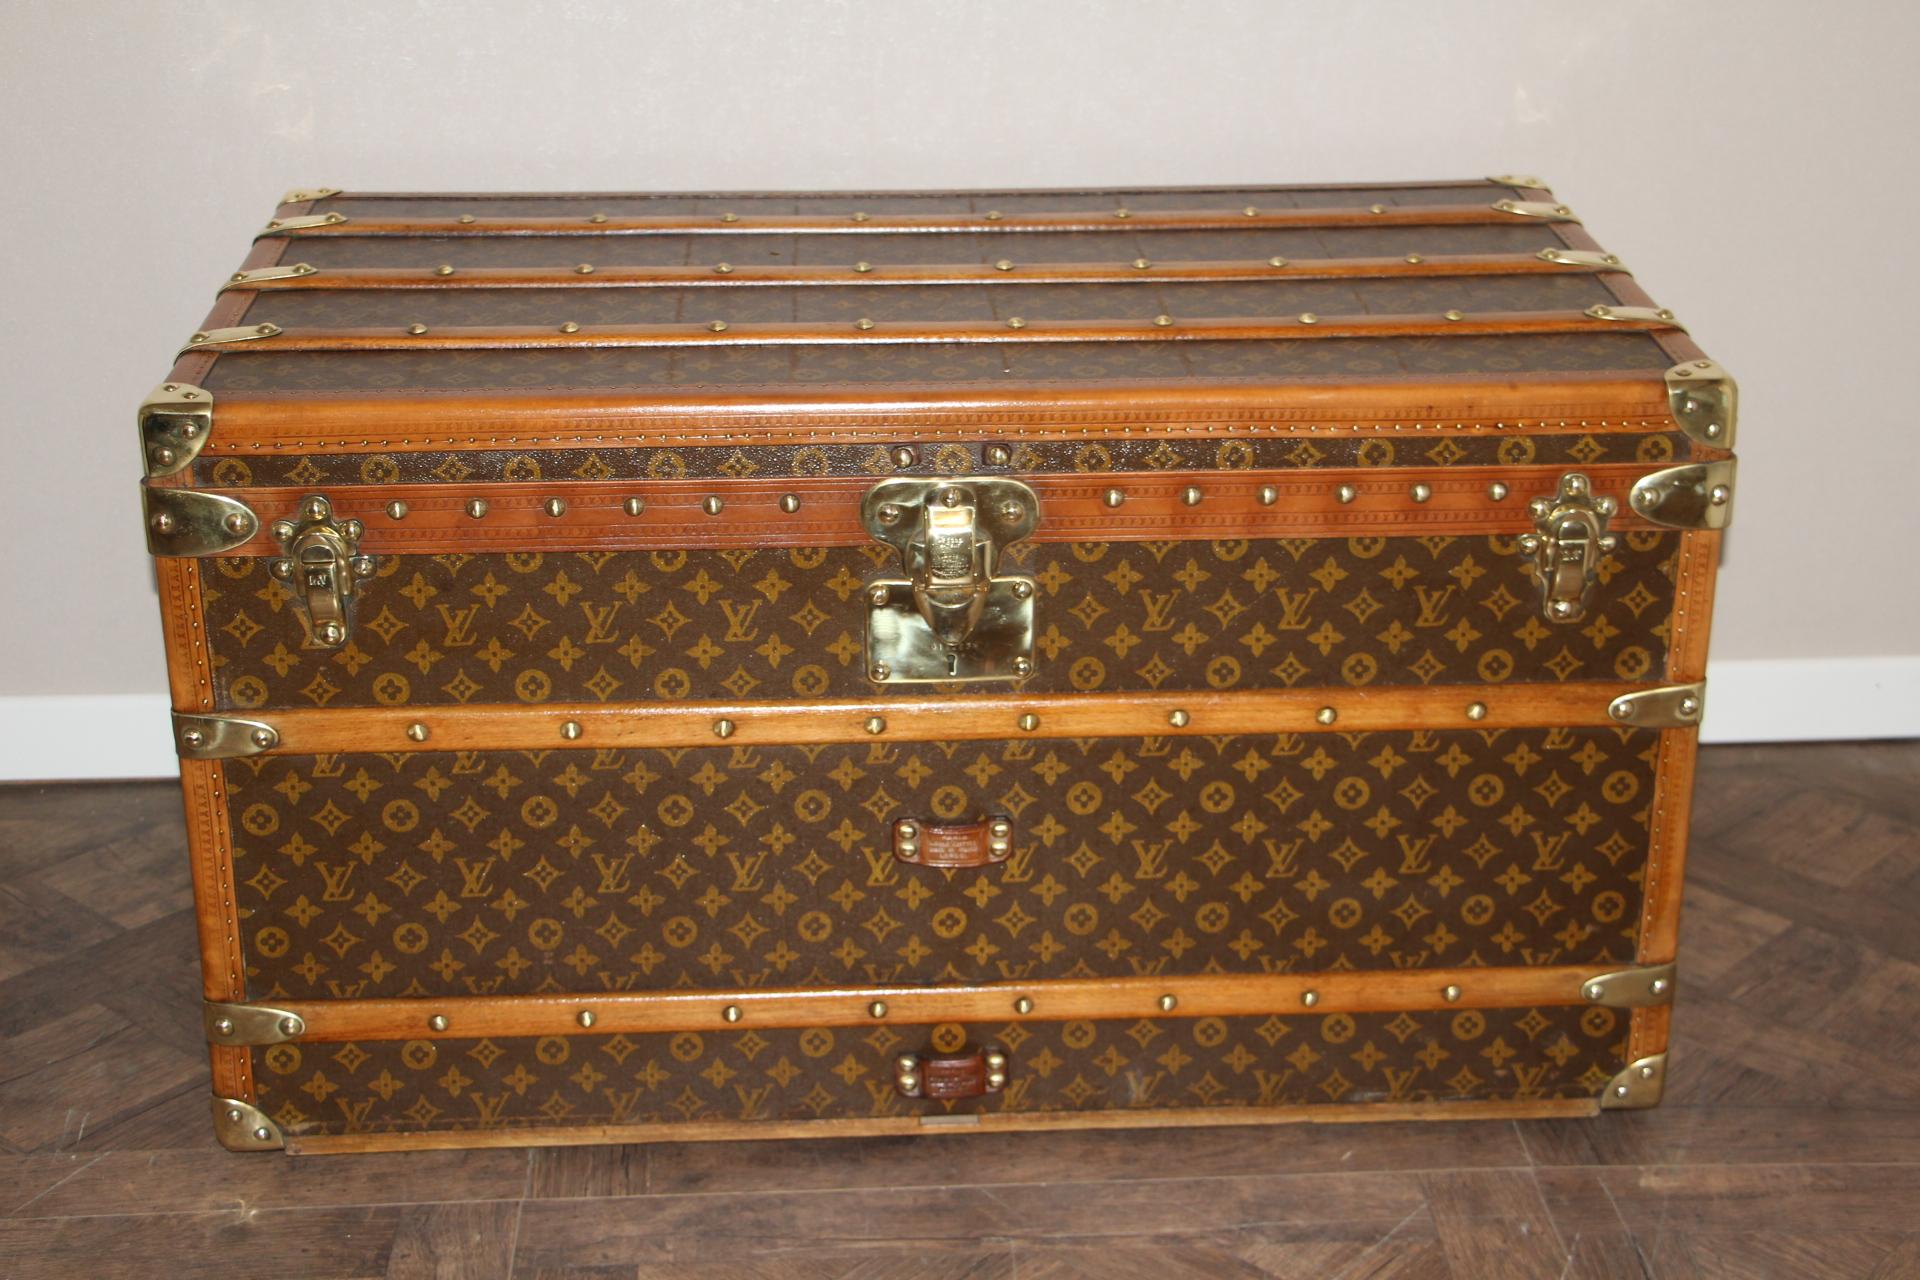 This beautiful Louis Vuitton trunk is all stenciled LV monogram canvas, with all Louis Vuitton stamped brass hardware and lozine trim. It features large leather side handles as well as customized painted French flag on each side. It has got a very